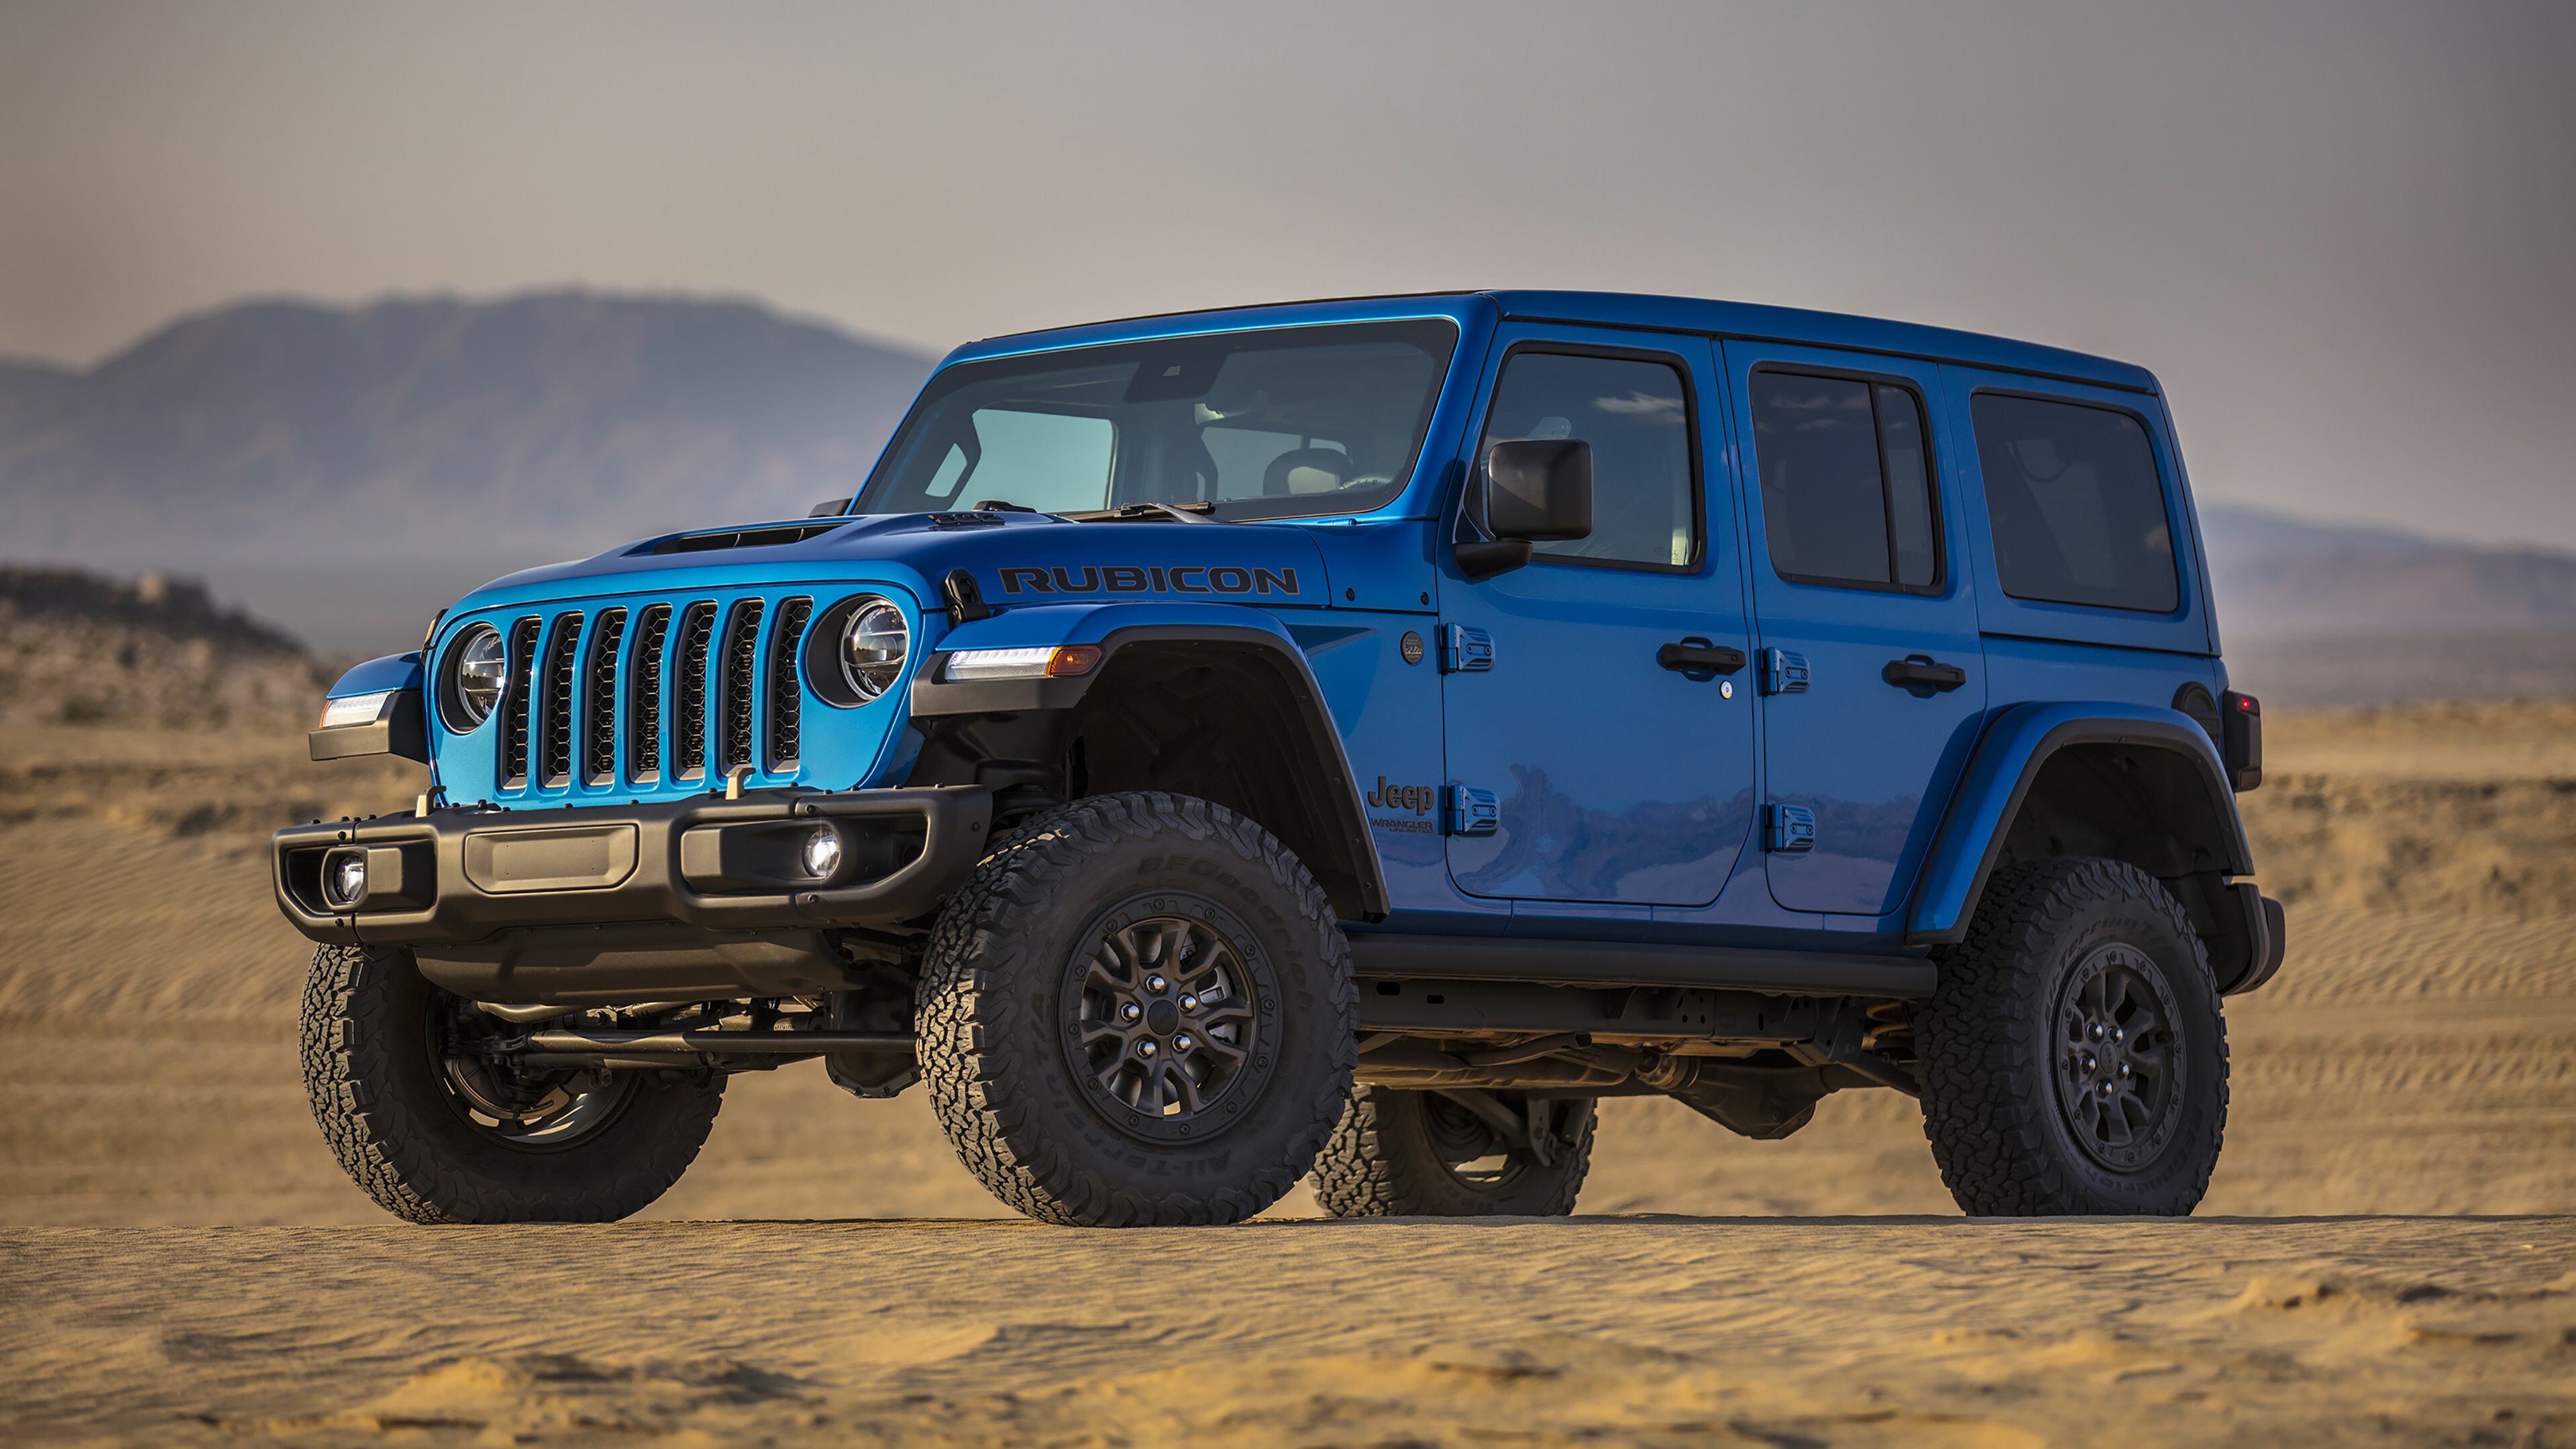 Jeep Wrangler: Rubicon, A series of mid-size four-wheel drive off-road SUVs. 3840x2160 4K Background.